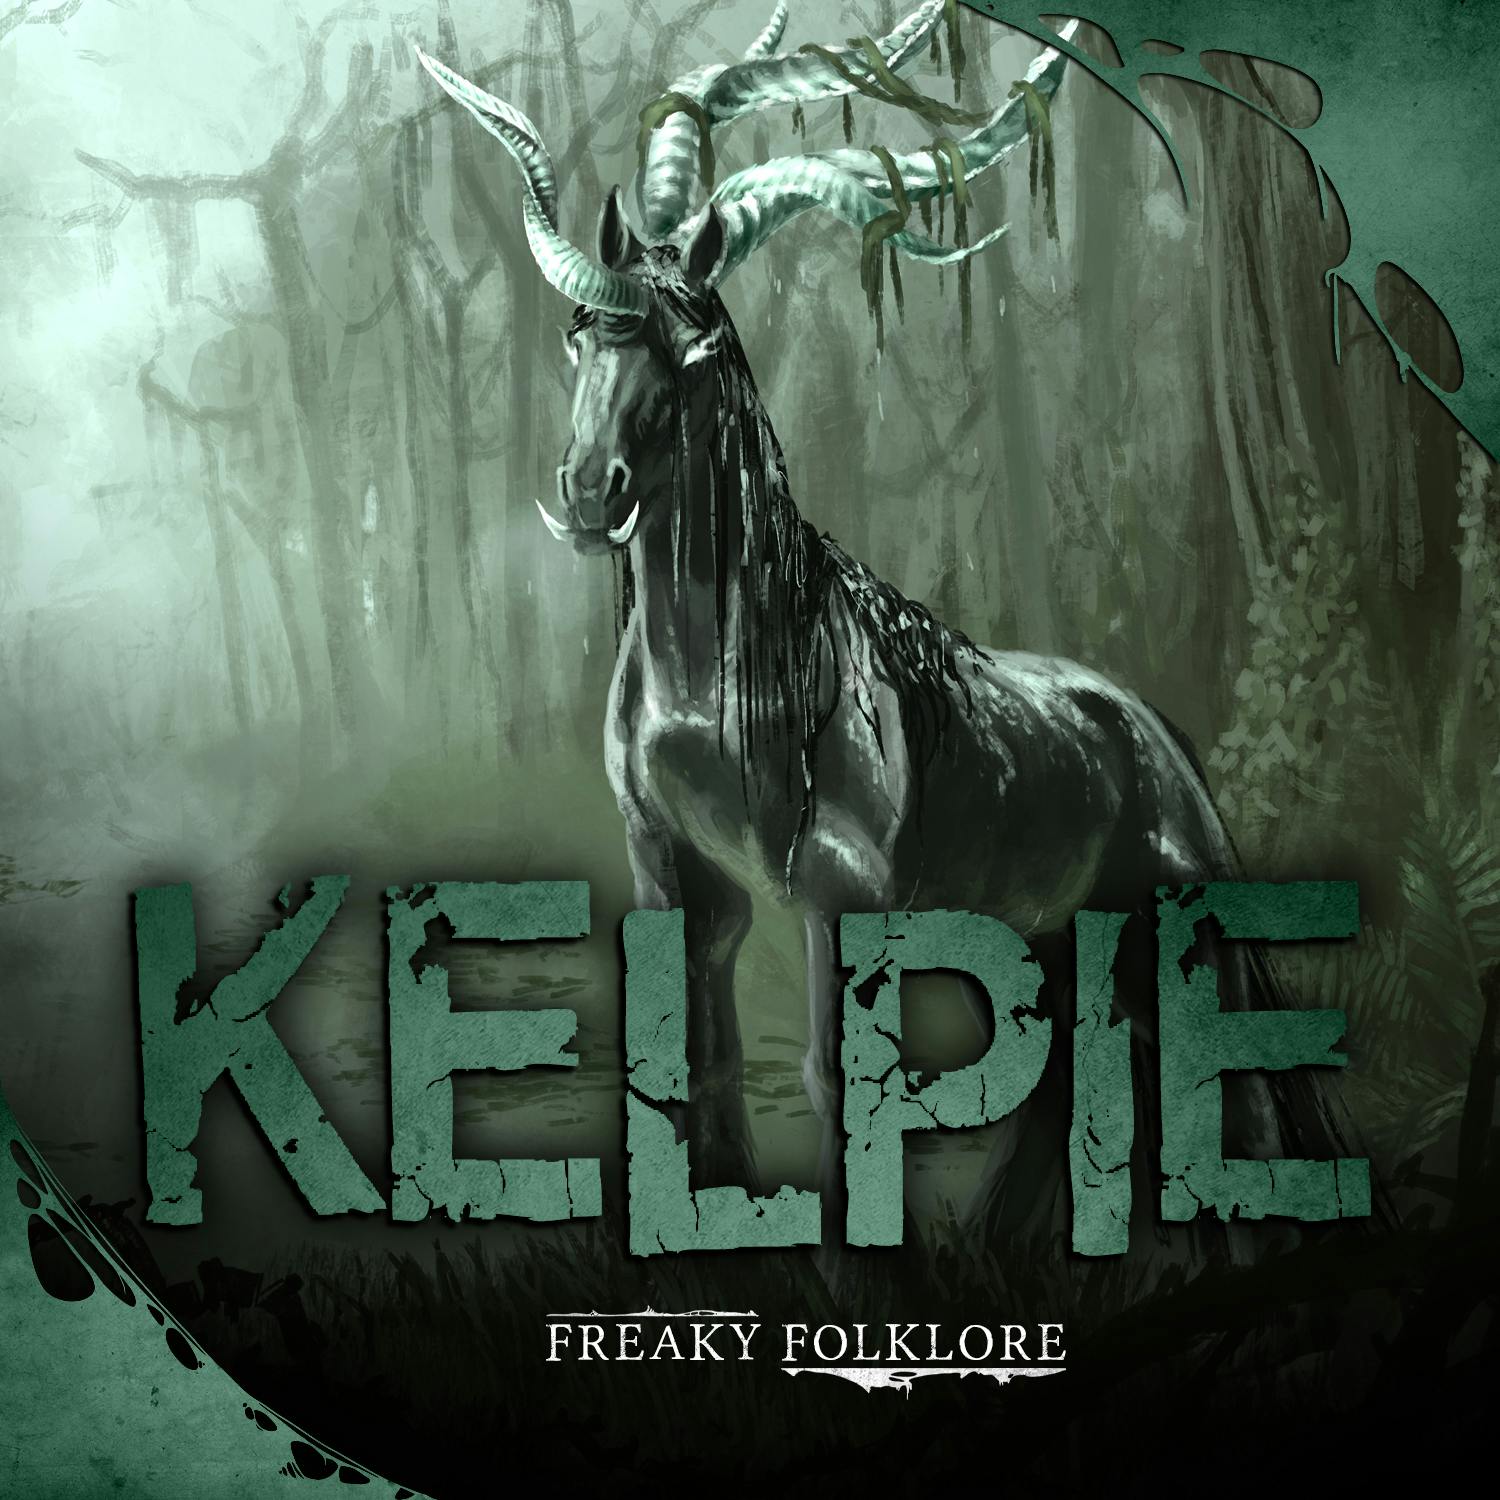 Kelpie - The Deadly Water Horse